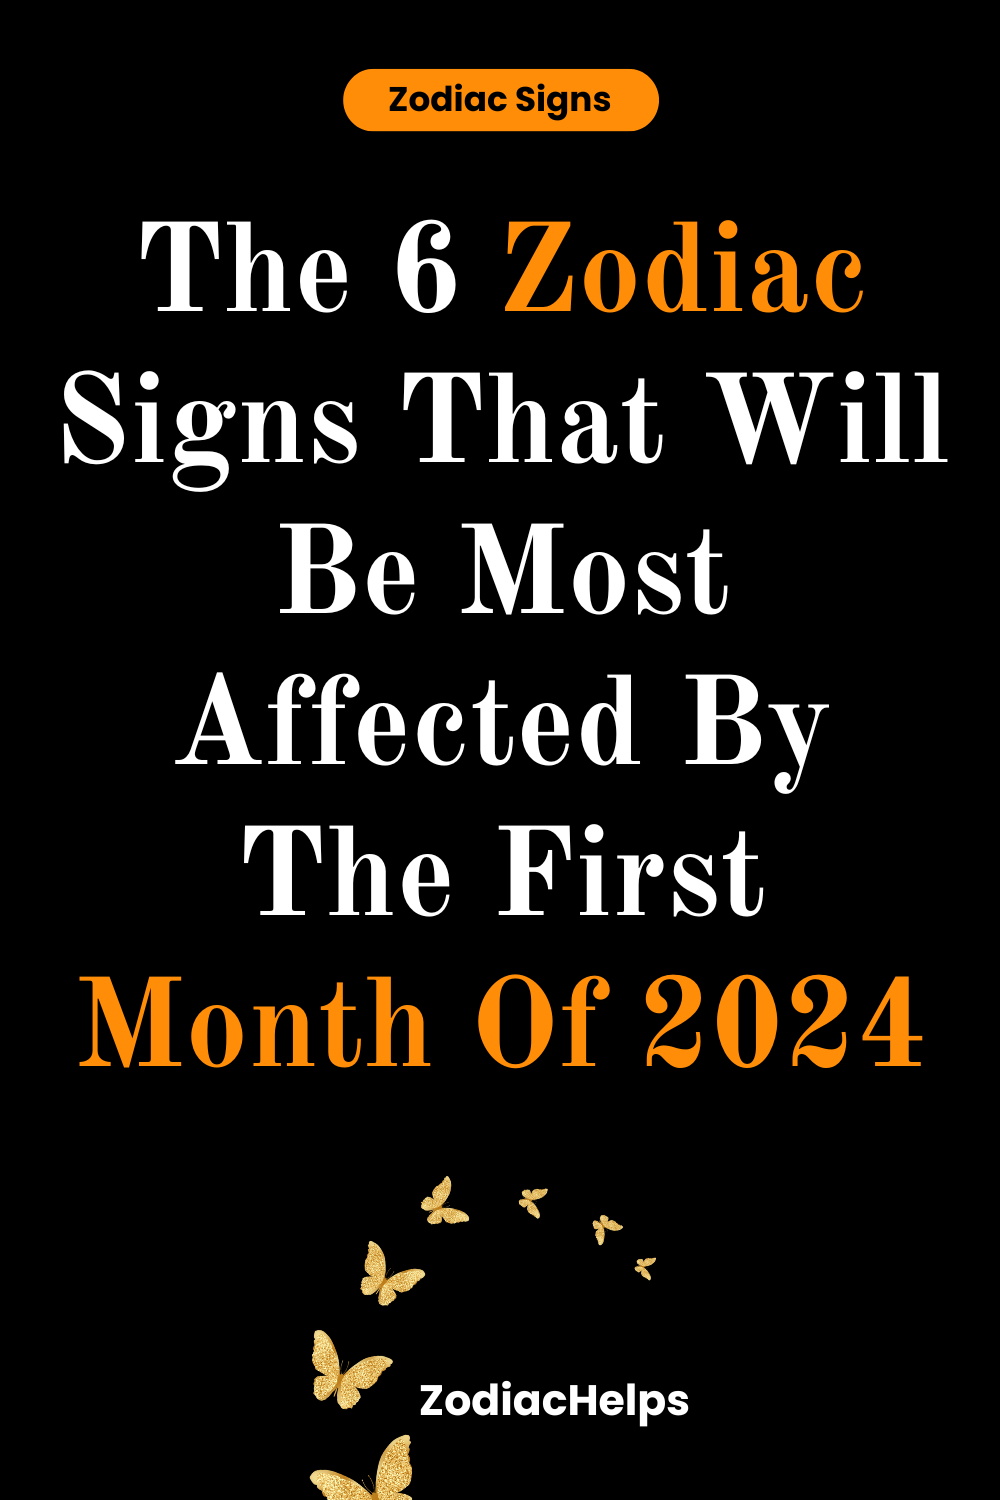 The 6 Zodiac Signs That Will Be Most Affected By The First Month Of 2024 